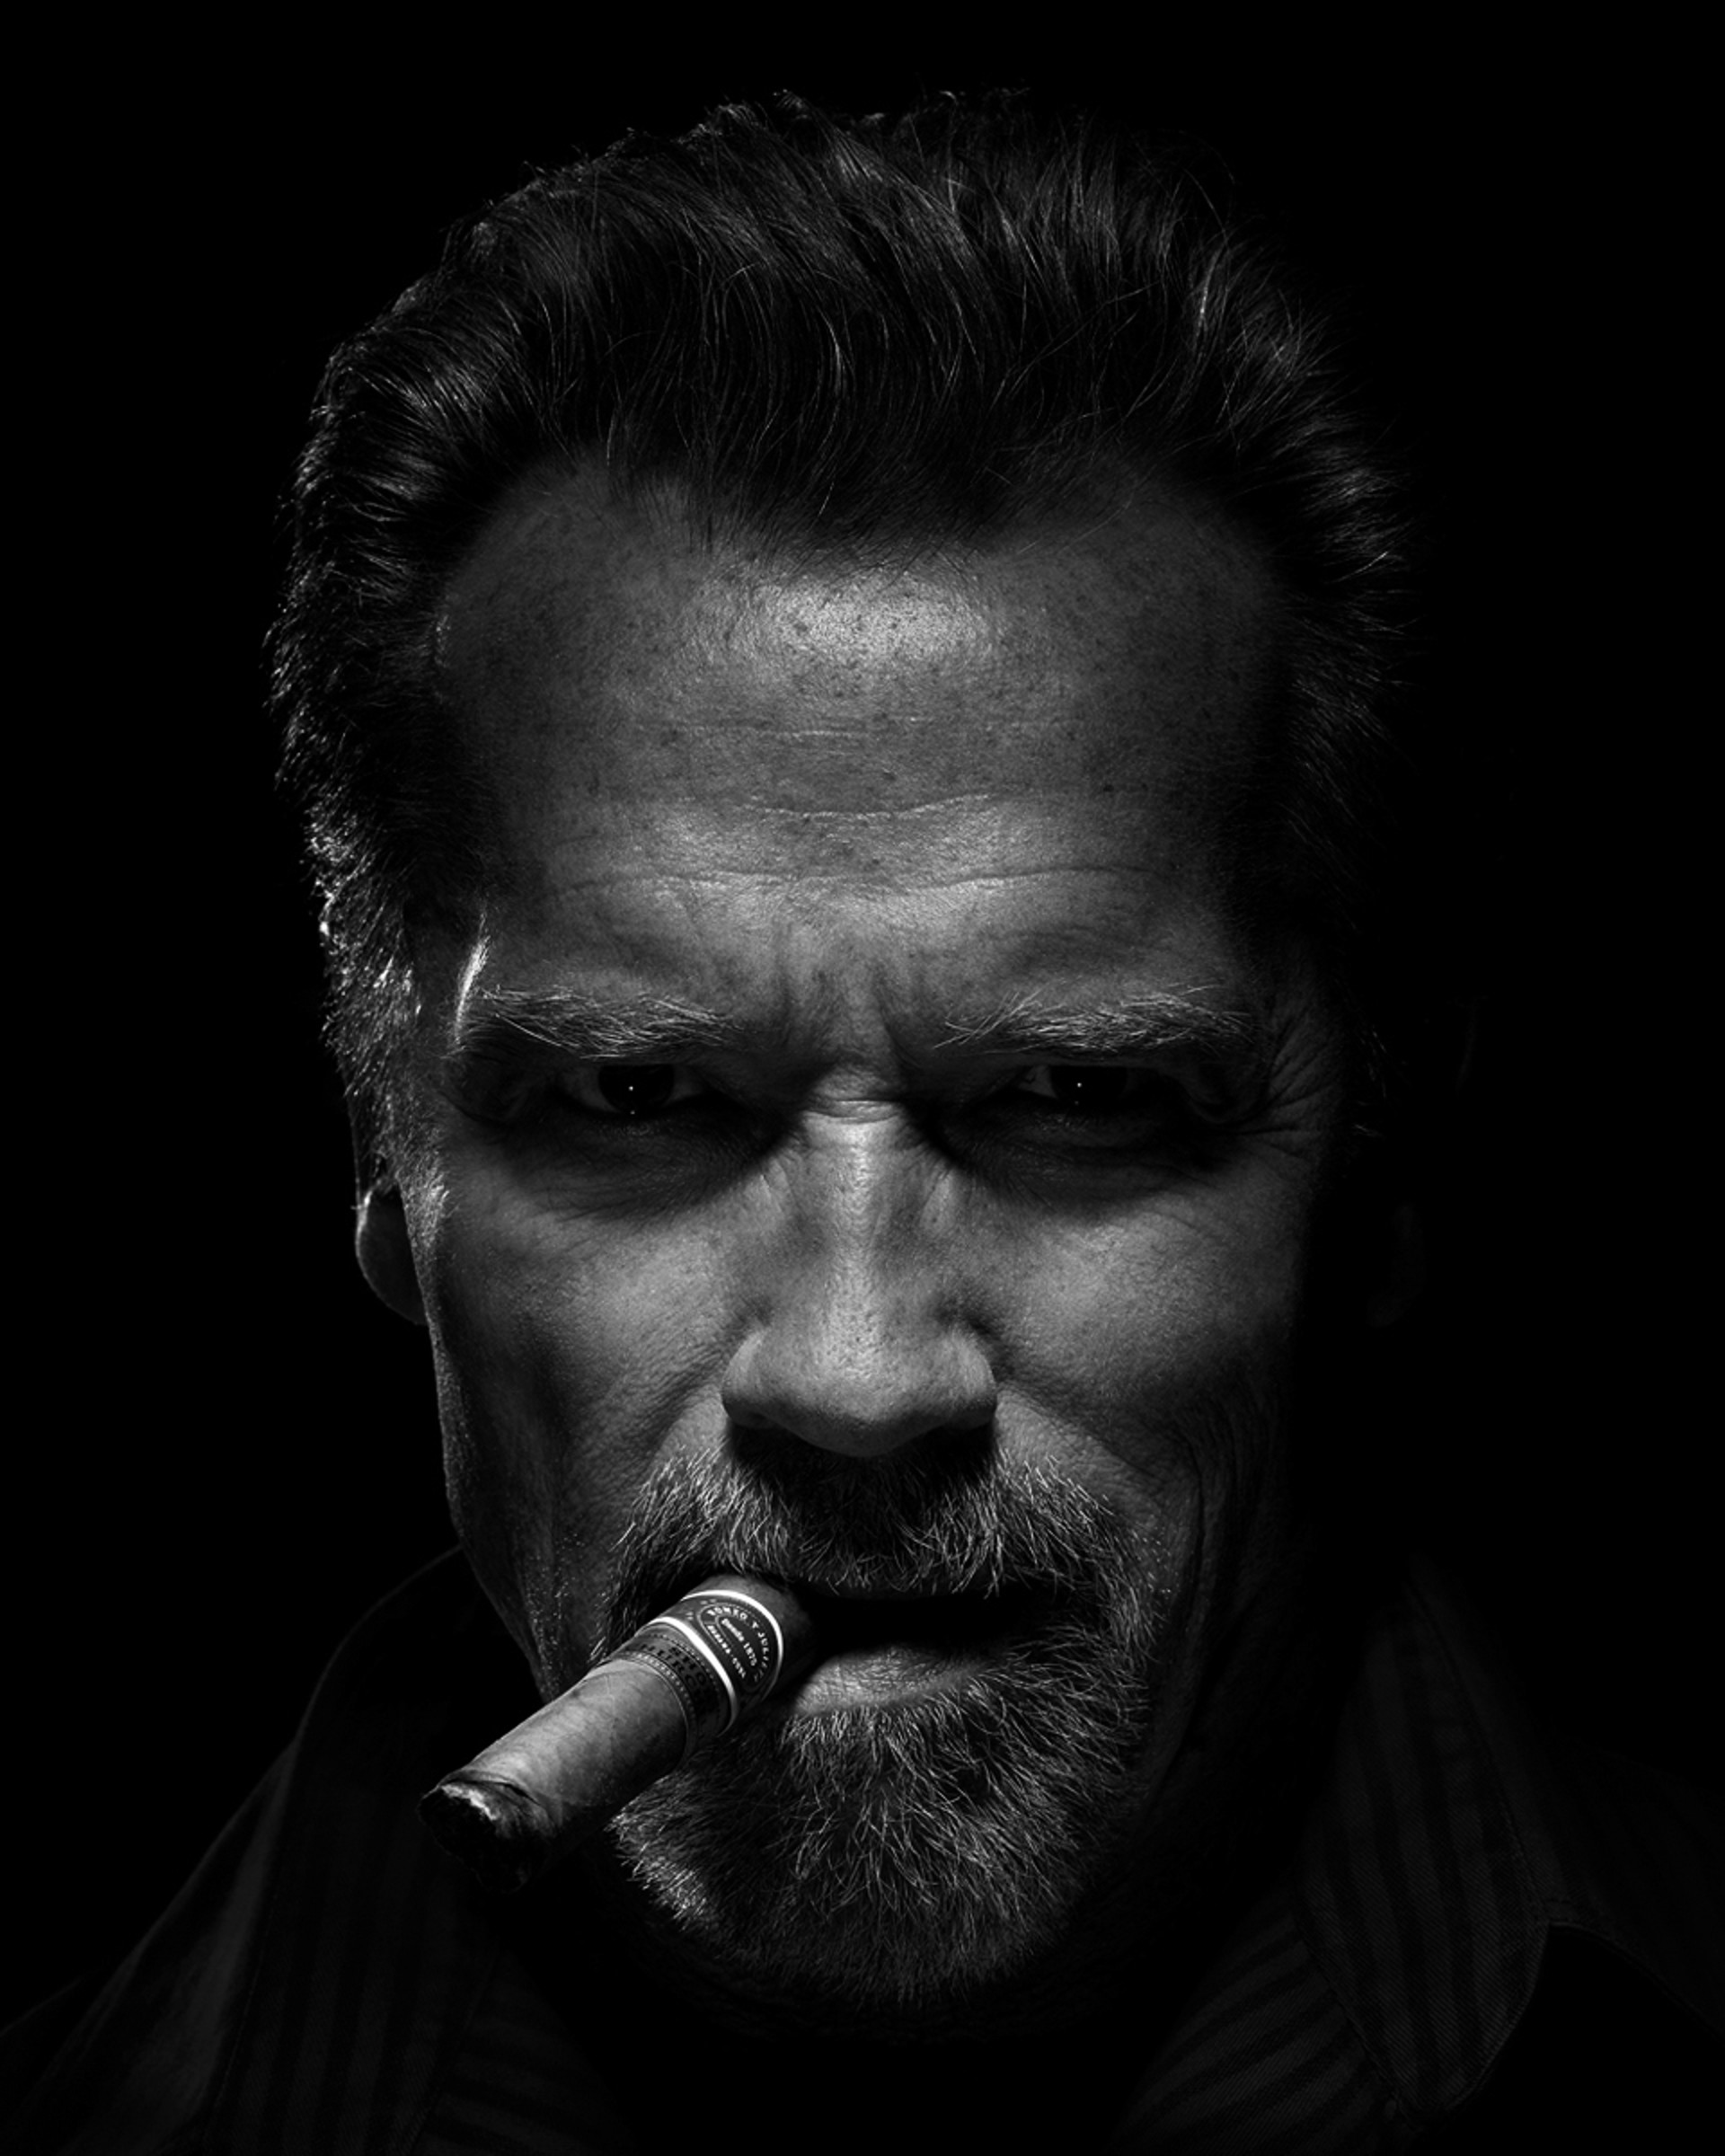 12014 Arnold Schwarzenegger with Cigar BW by Timothy White